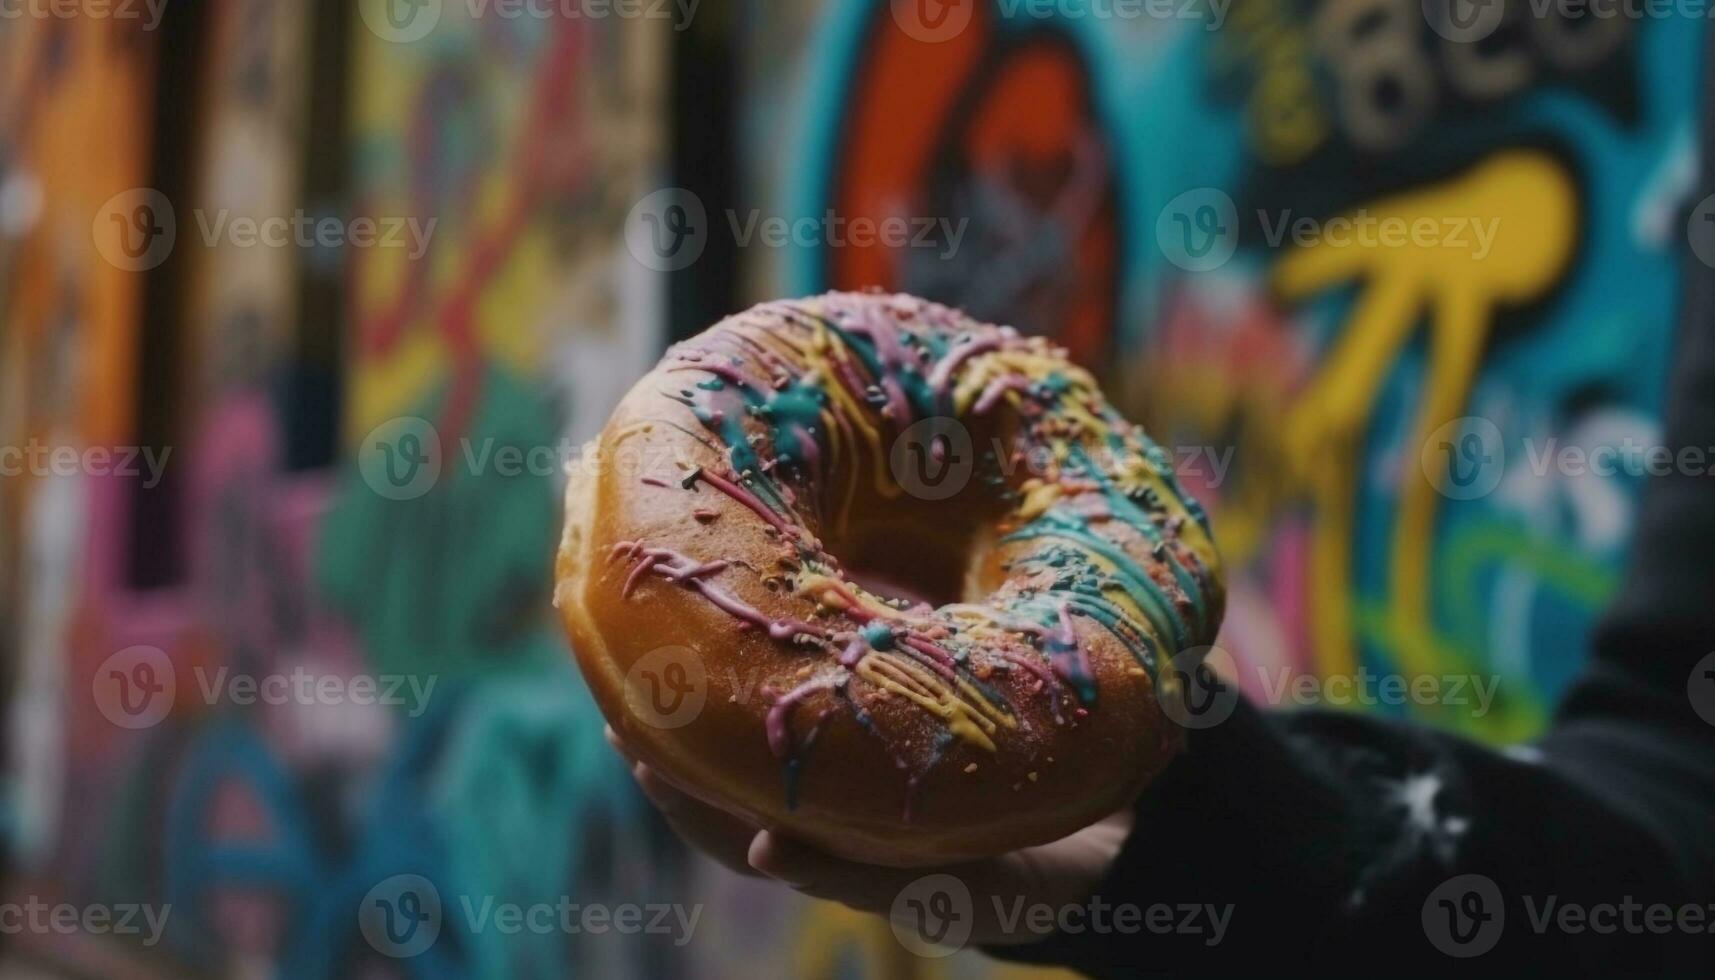 Indulgent donut with colorful icing and chocolate generated by AI photo